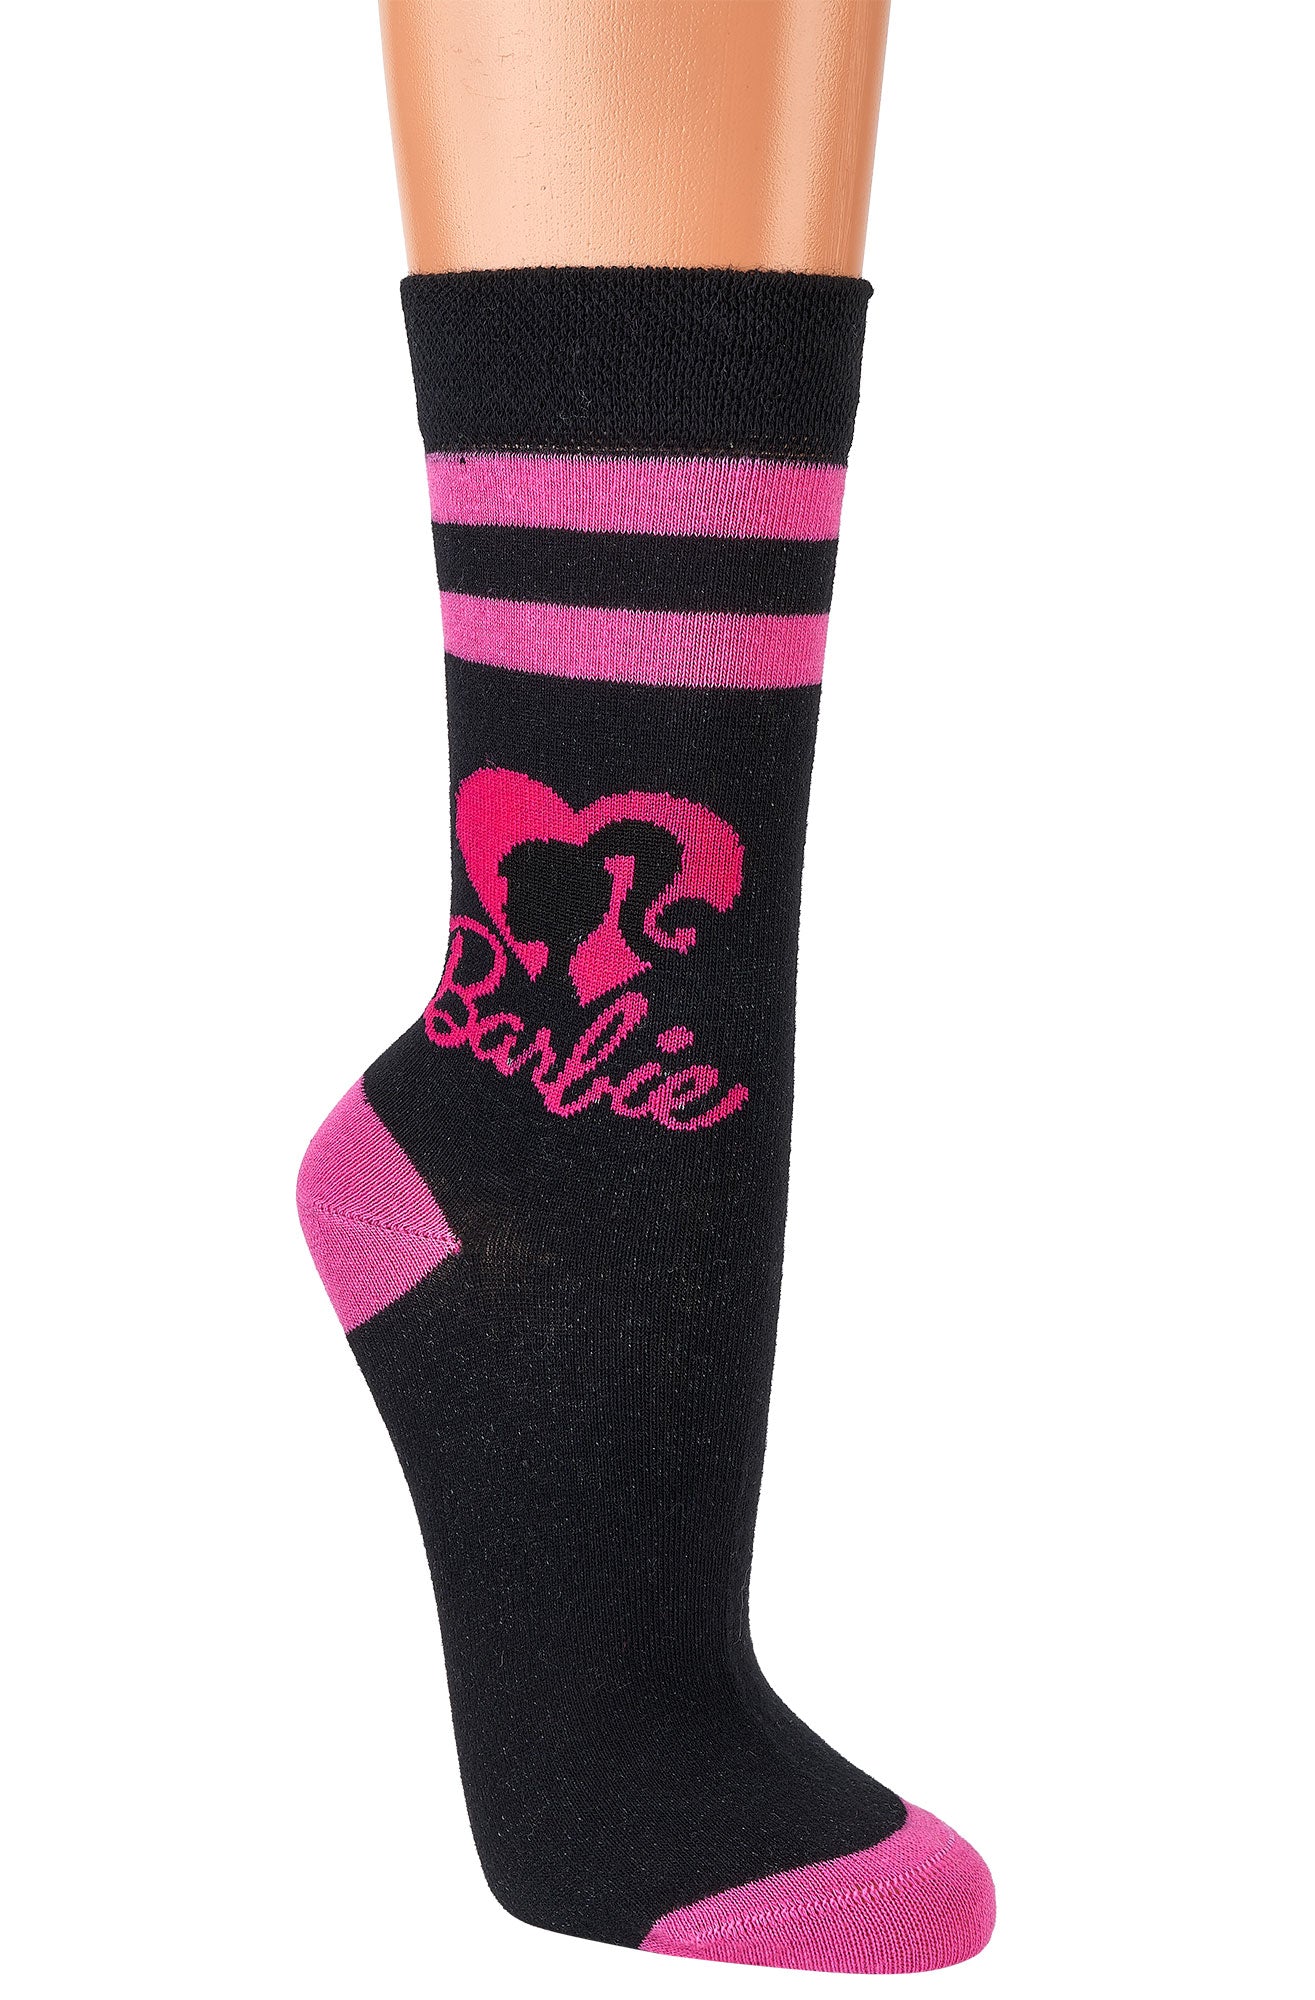 Barbie® trendy socks for girls and women in typical Barbie style